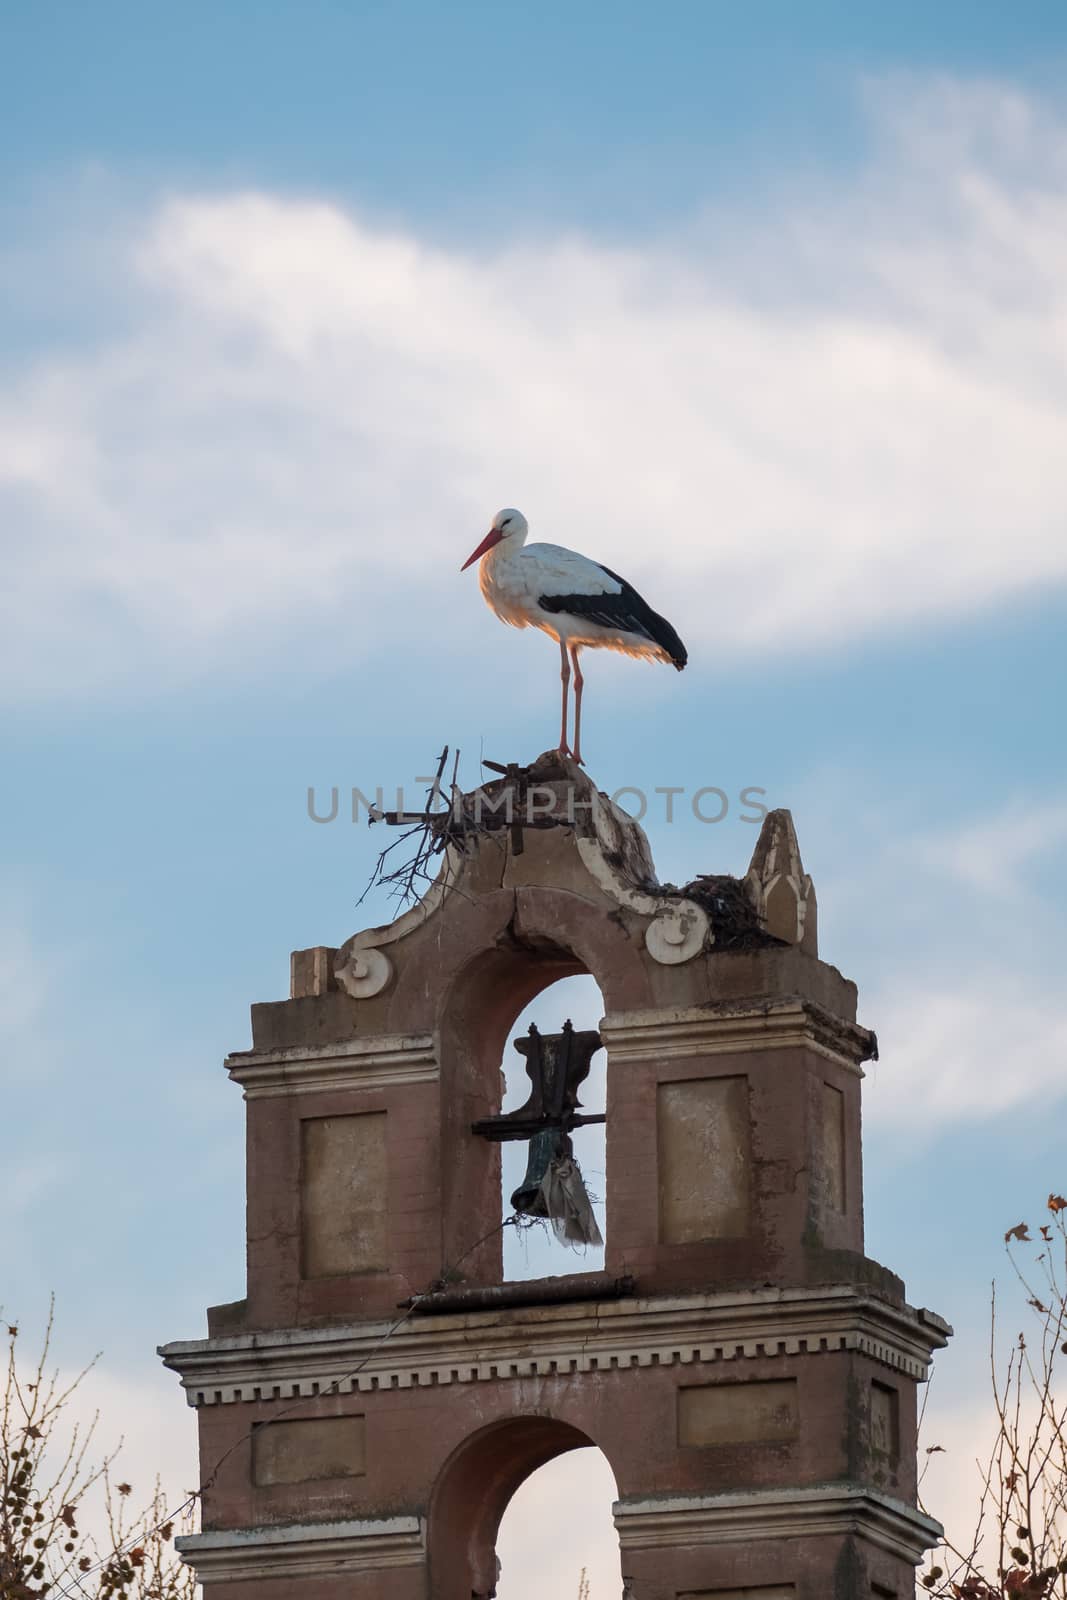 Storks building their nest in an old bell tower